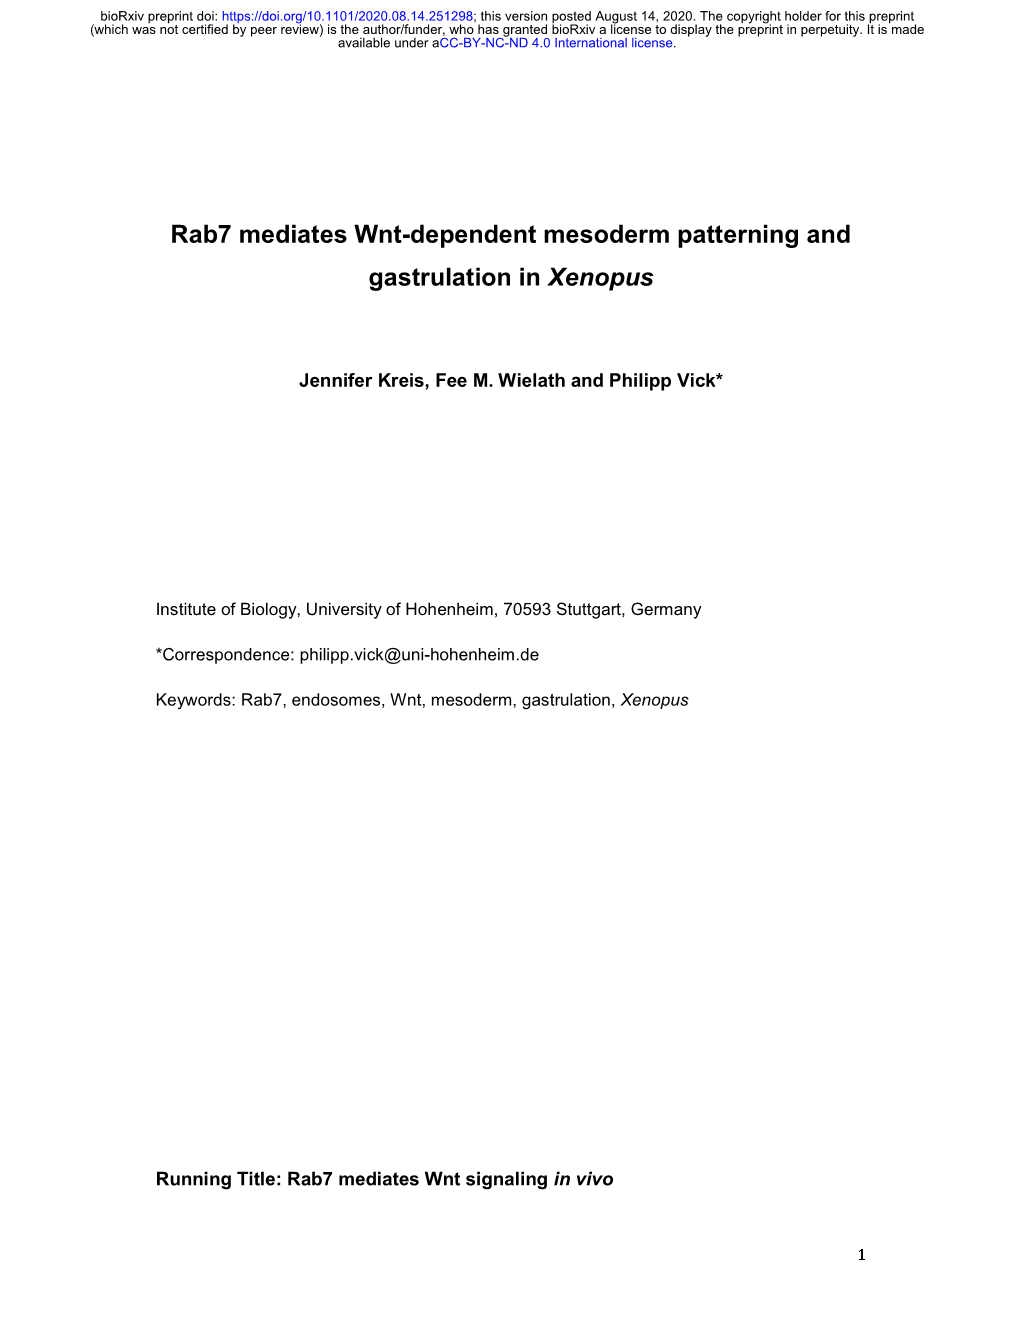 Rab7 Mediates Wnt-Dependent Mesoderm Patterning and Gastrulation in Xenopus